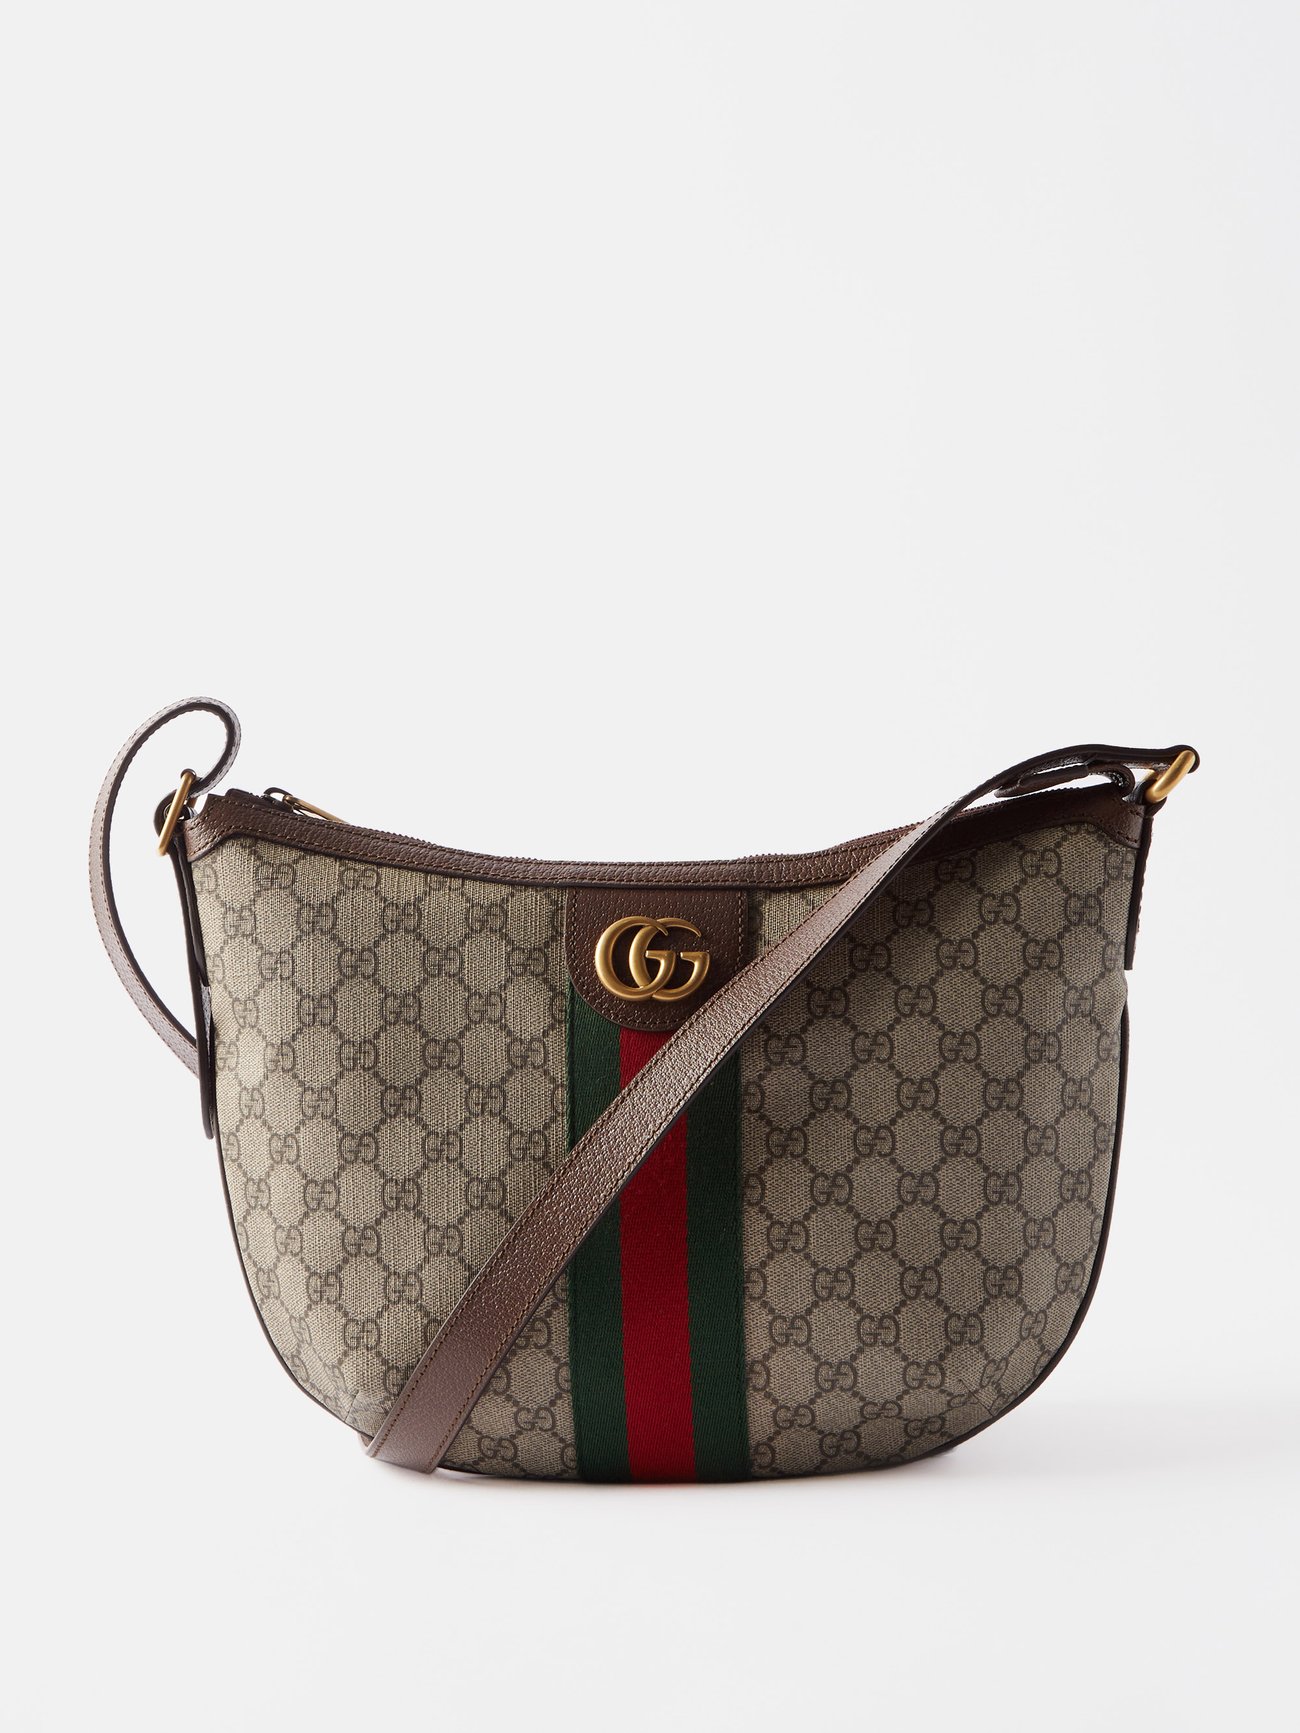 Neutral Ophidia GG-Supreme canvas and leather shoulder bag | Gucci ...